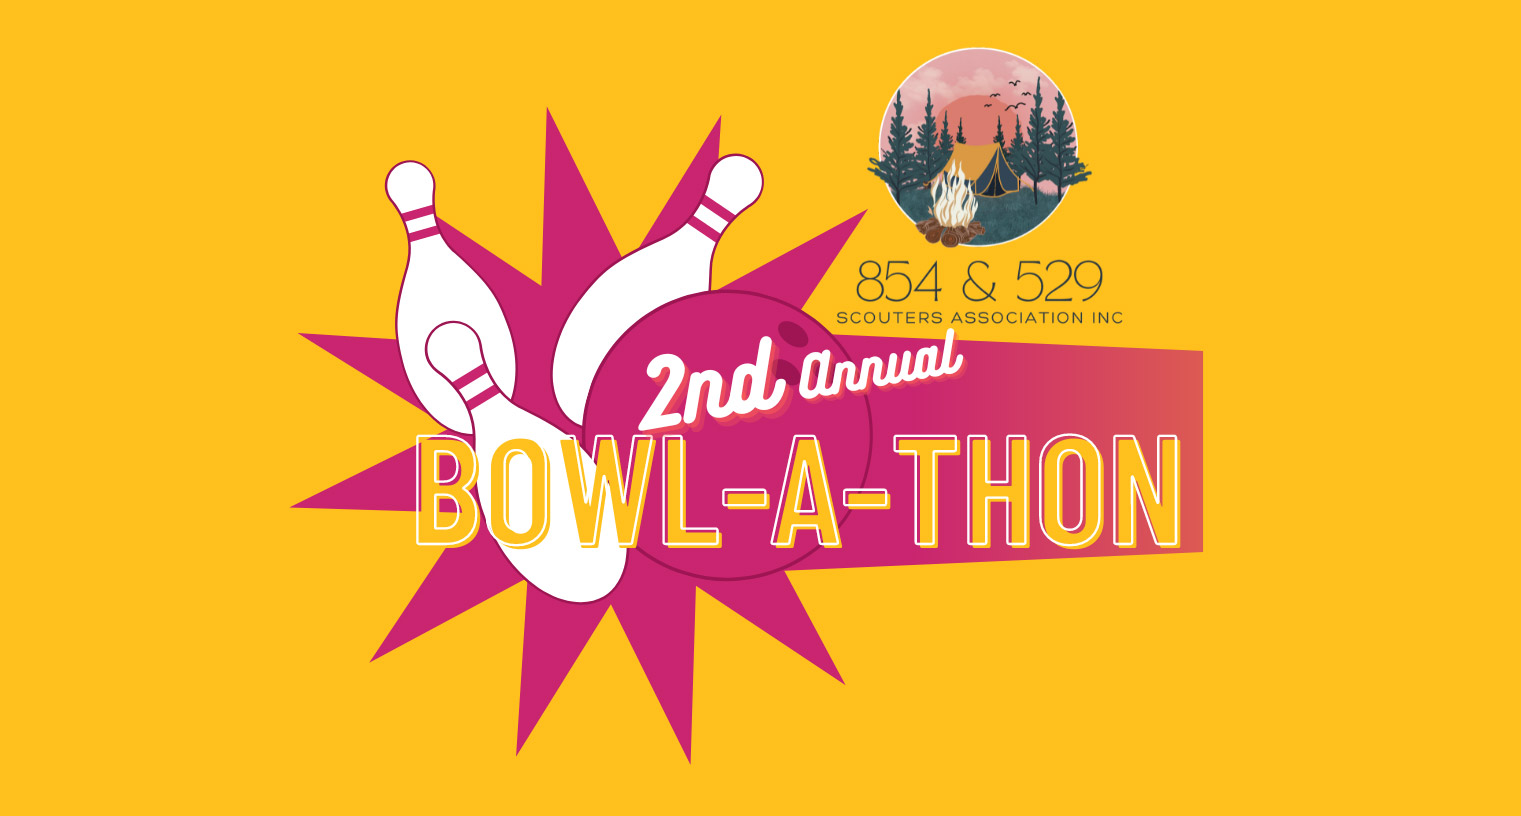 854 and 529 Scouters Association Annual Bowl-A-Thon